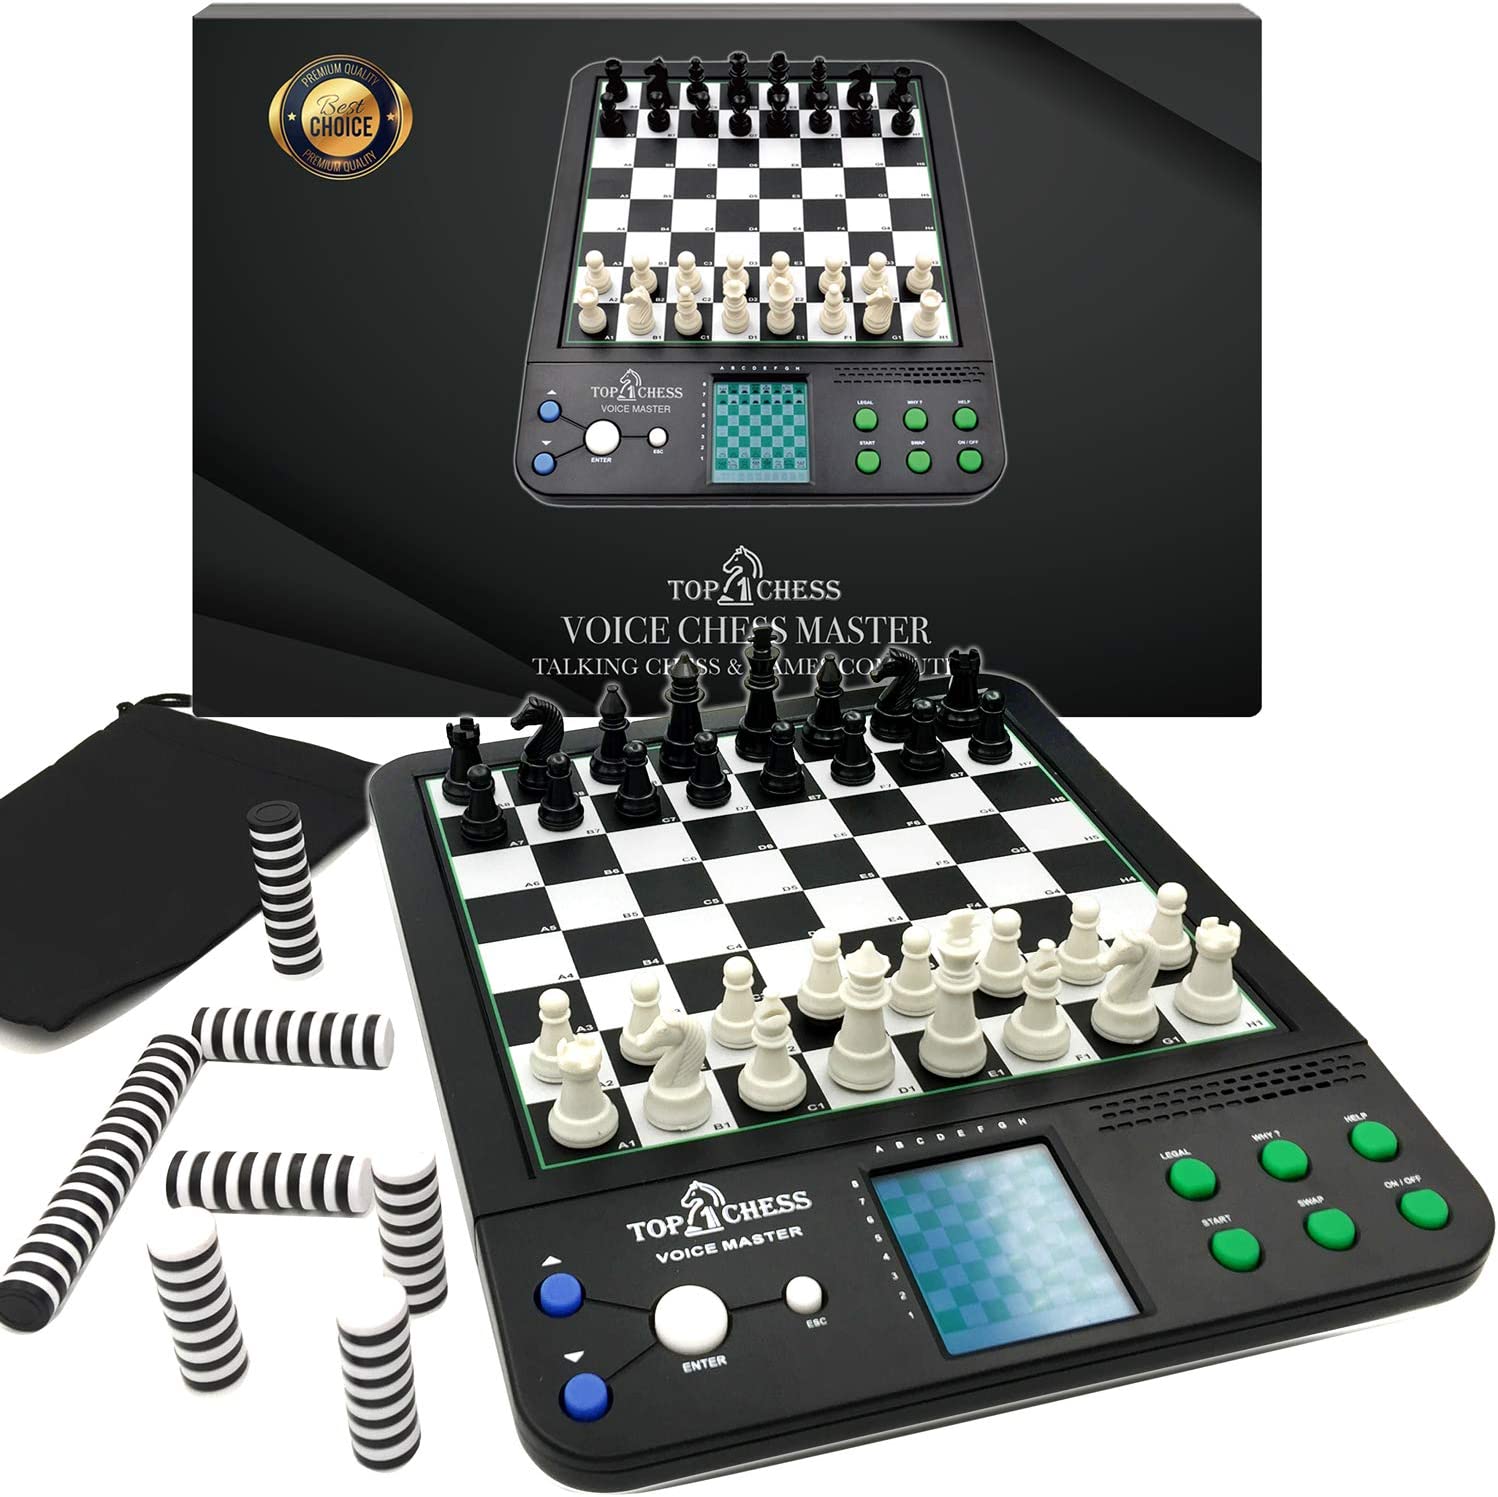 Top 1 Chess Electronic Chess Set | Chess Sets for Adults | Chess Set for Kids | Voice Chess Computer Teaching System | Chess Strategy Beginners Improving | Large Screen Learning Chess Set Board Game - image 1 of 7